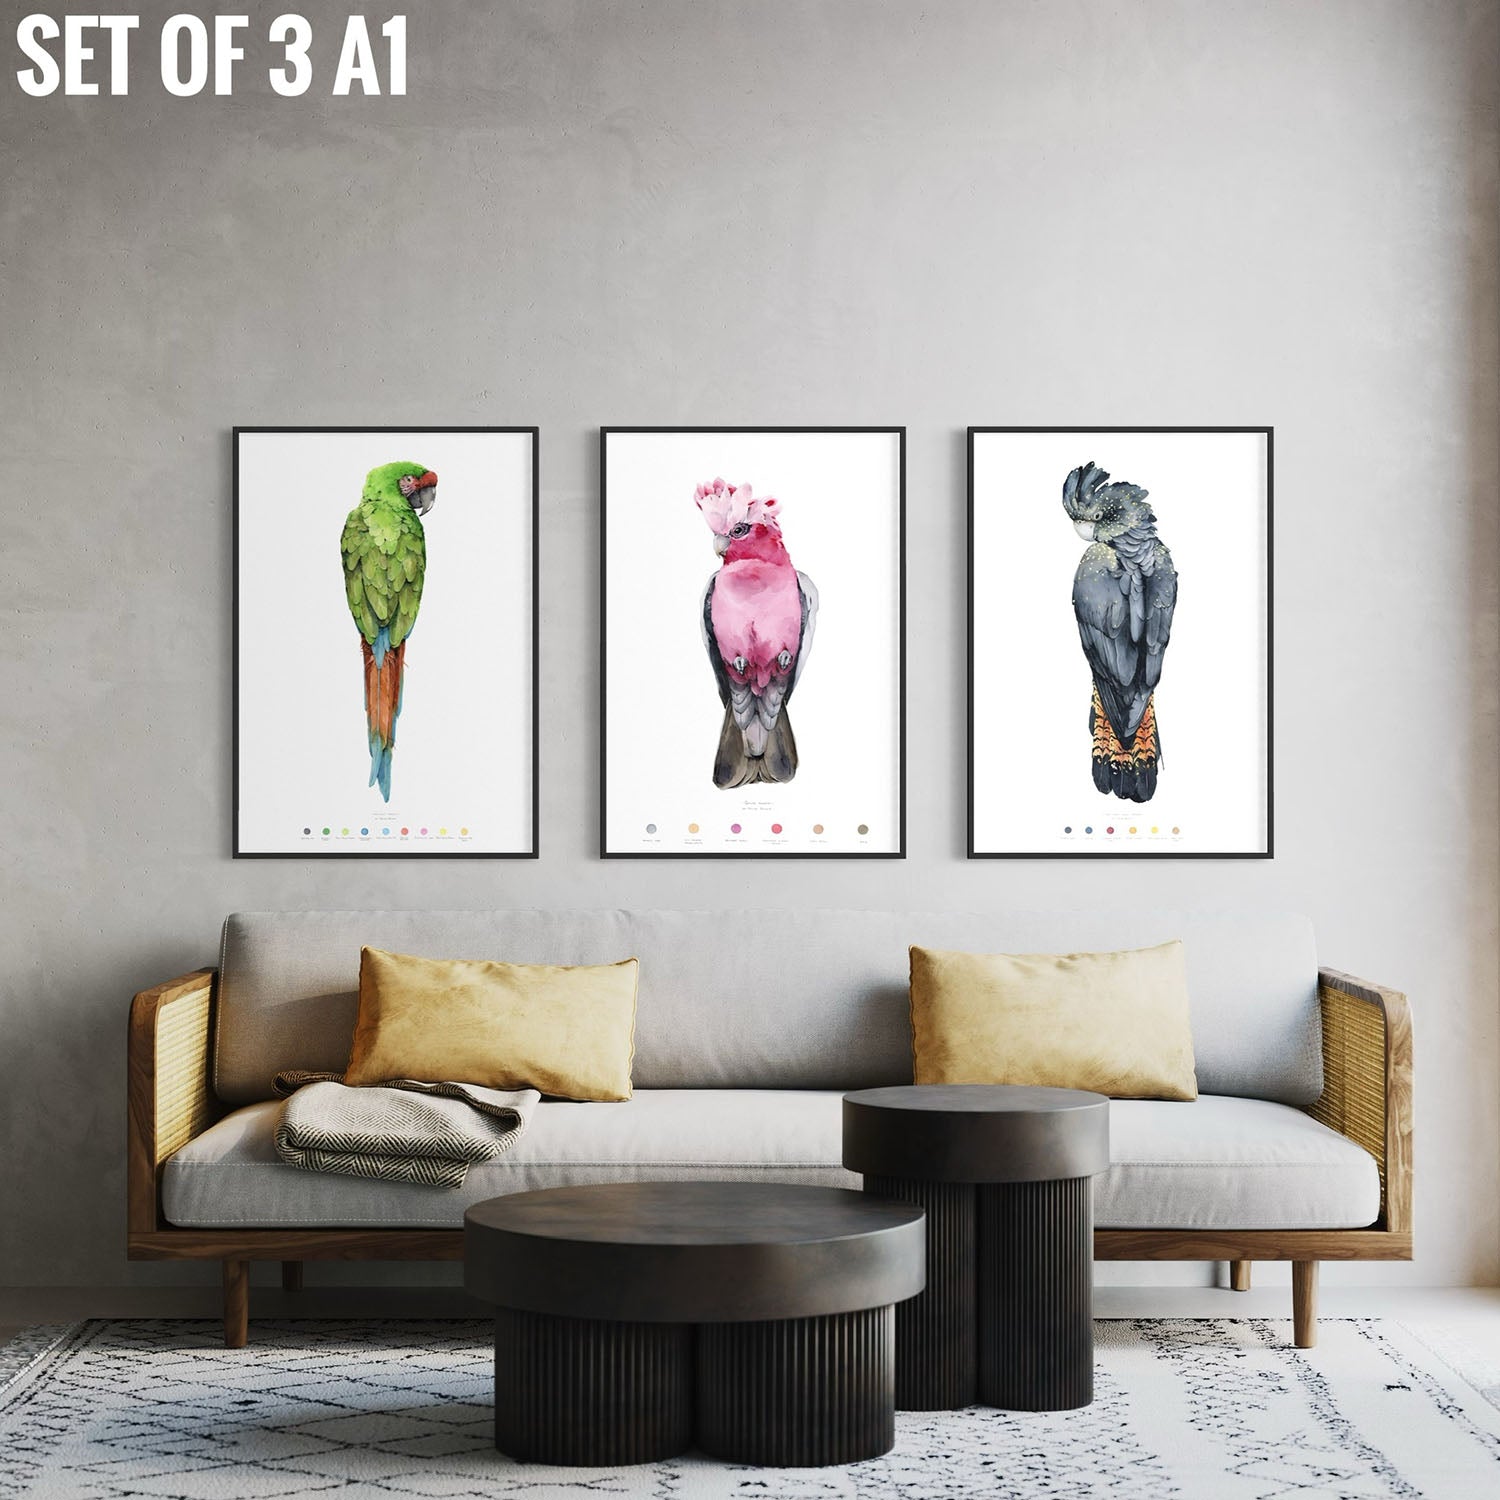 Set of 3 Prints from the "Birds" collection